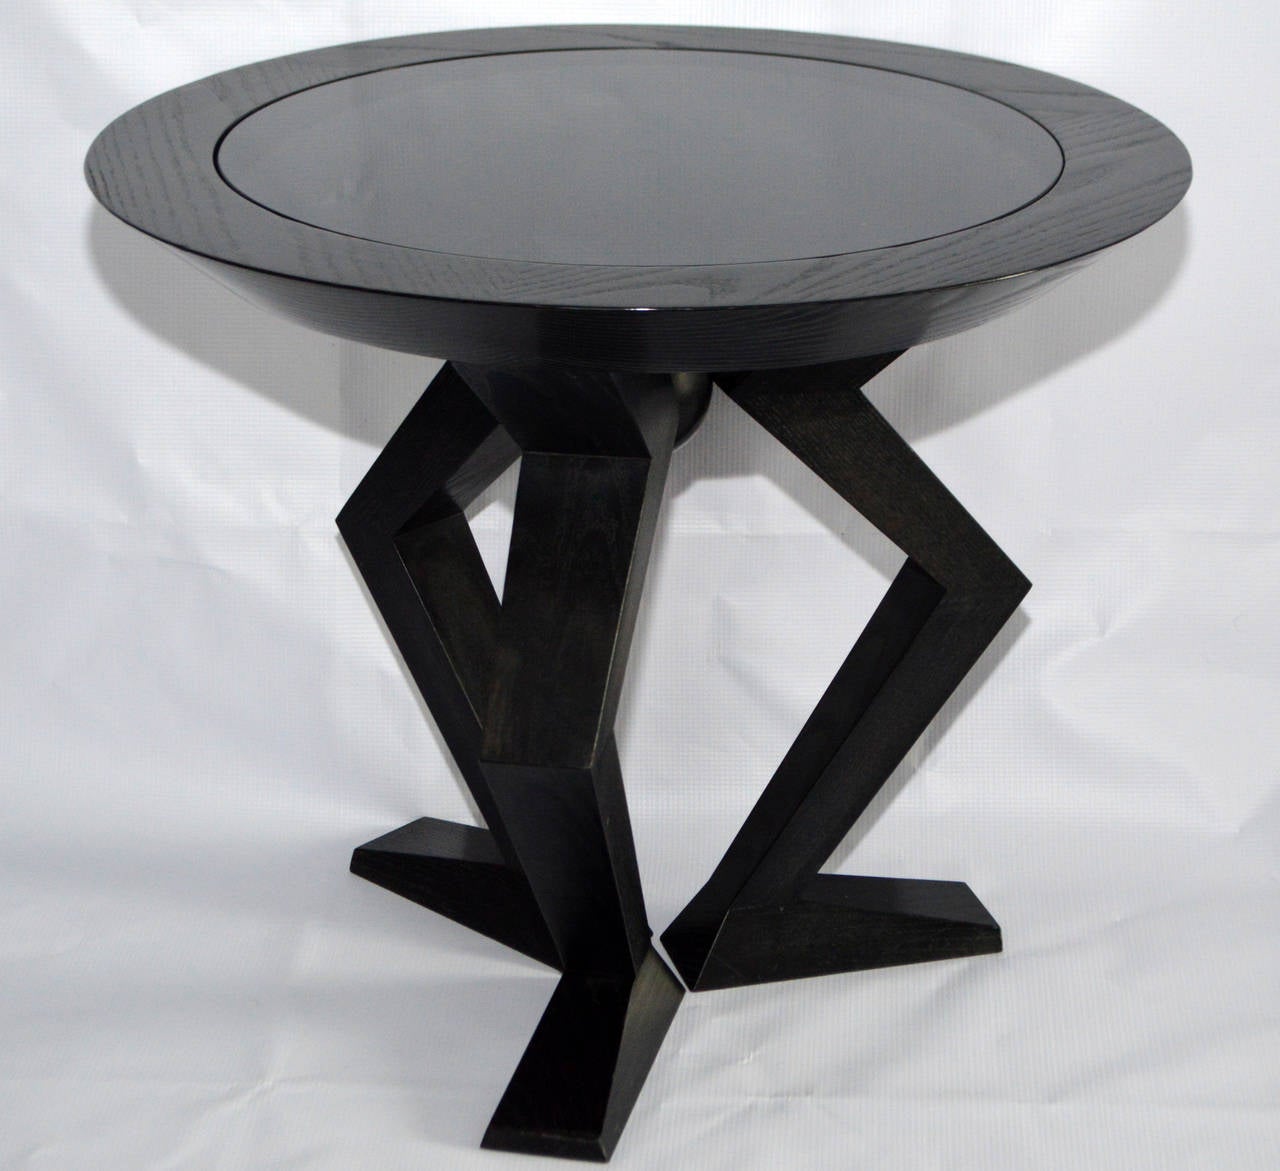 This fabulous Brueton Geppetto Table inspired by early African designs, features uniquely shaped and tapered solid ash legs. These stylized tables have a mind and personality of their own.
Brueton Geppetto Table by Stanley Jay Friedman. Black wood,